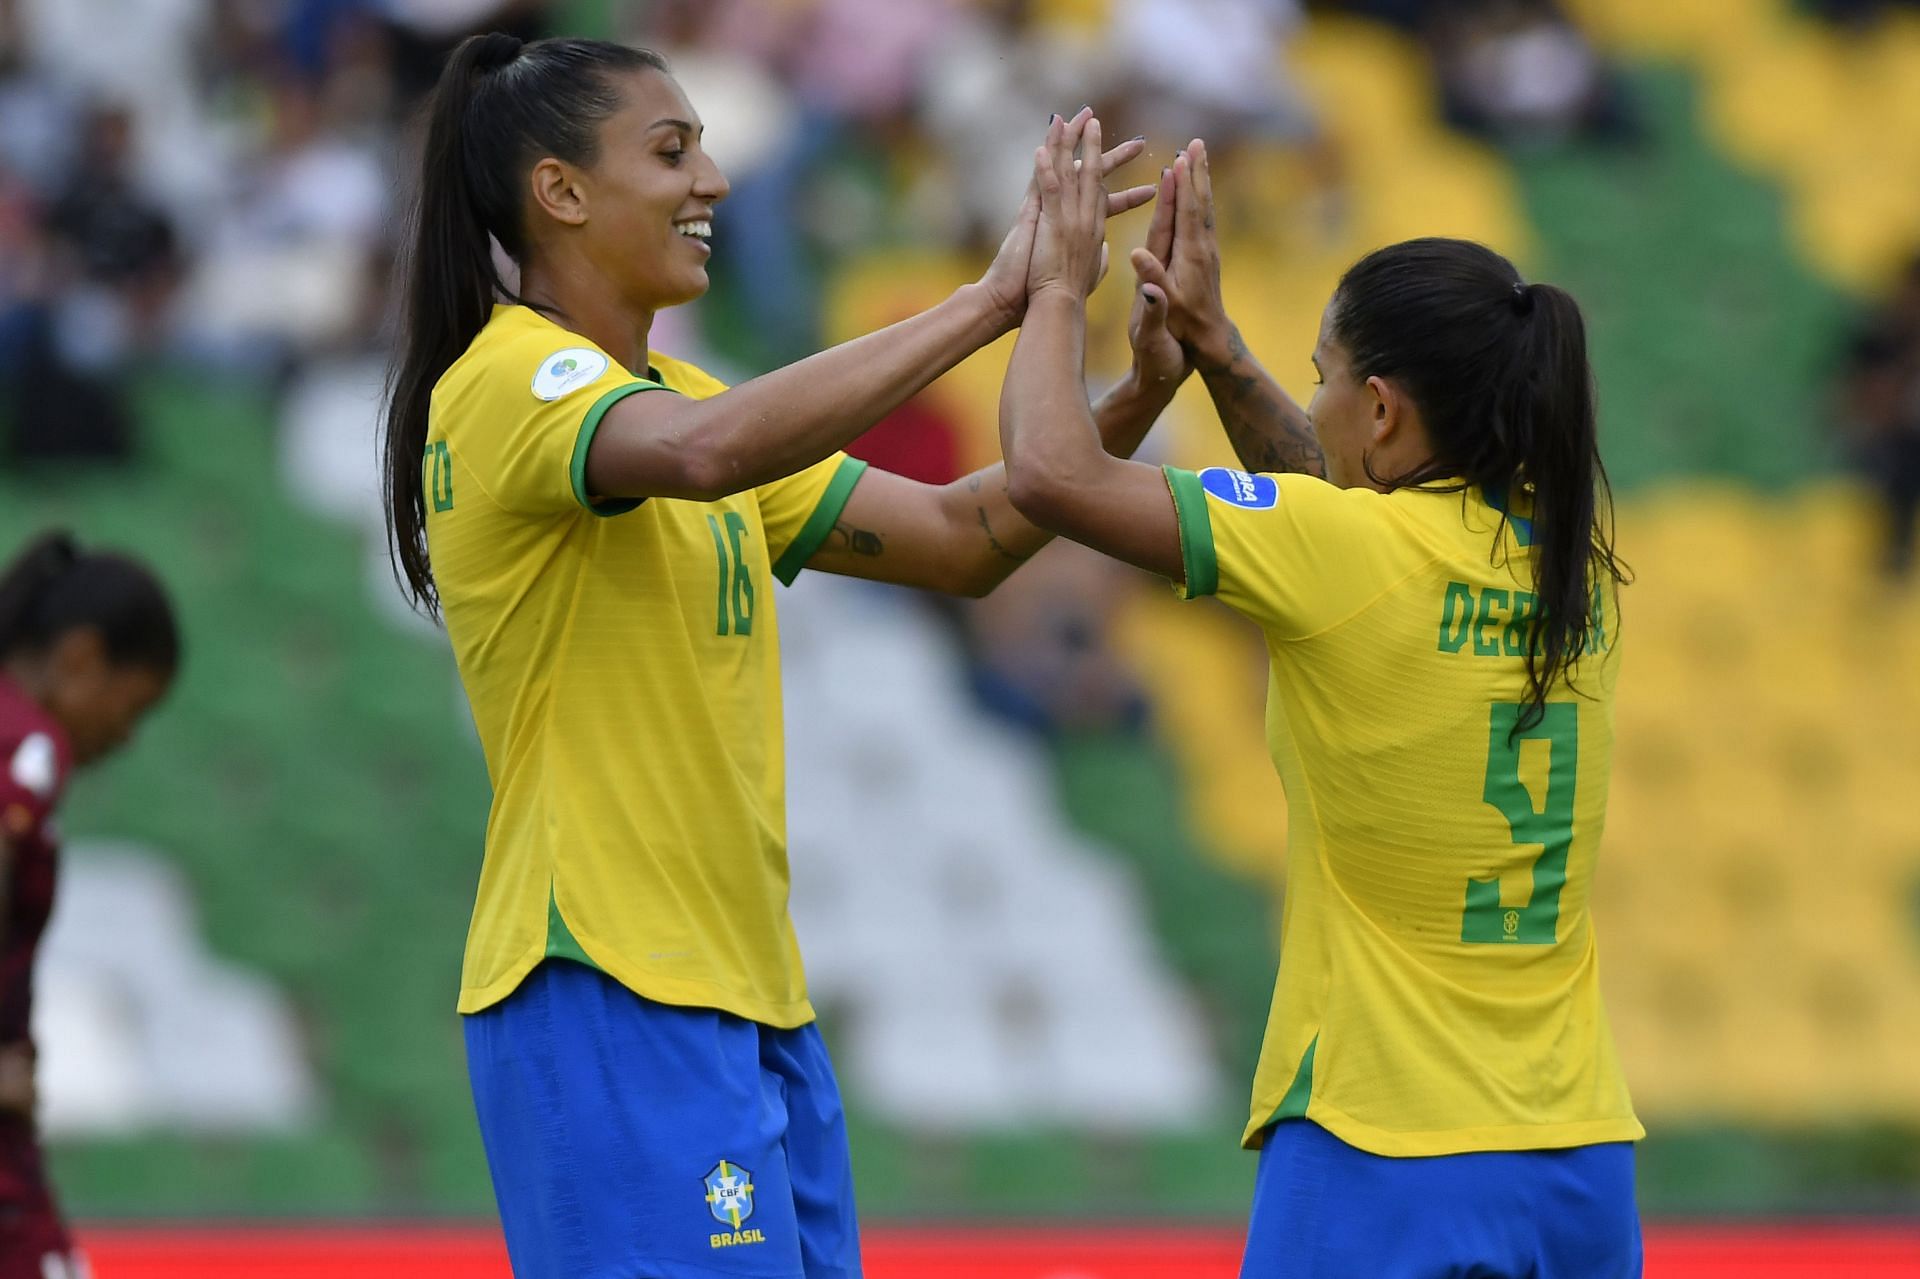 Brazil play Peru in their final group stage fixture of the Copa America Femenina 2022 on Thursday